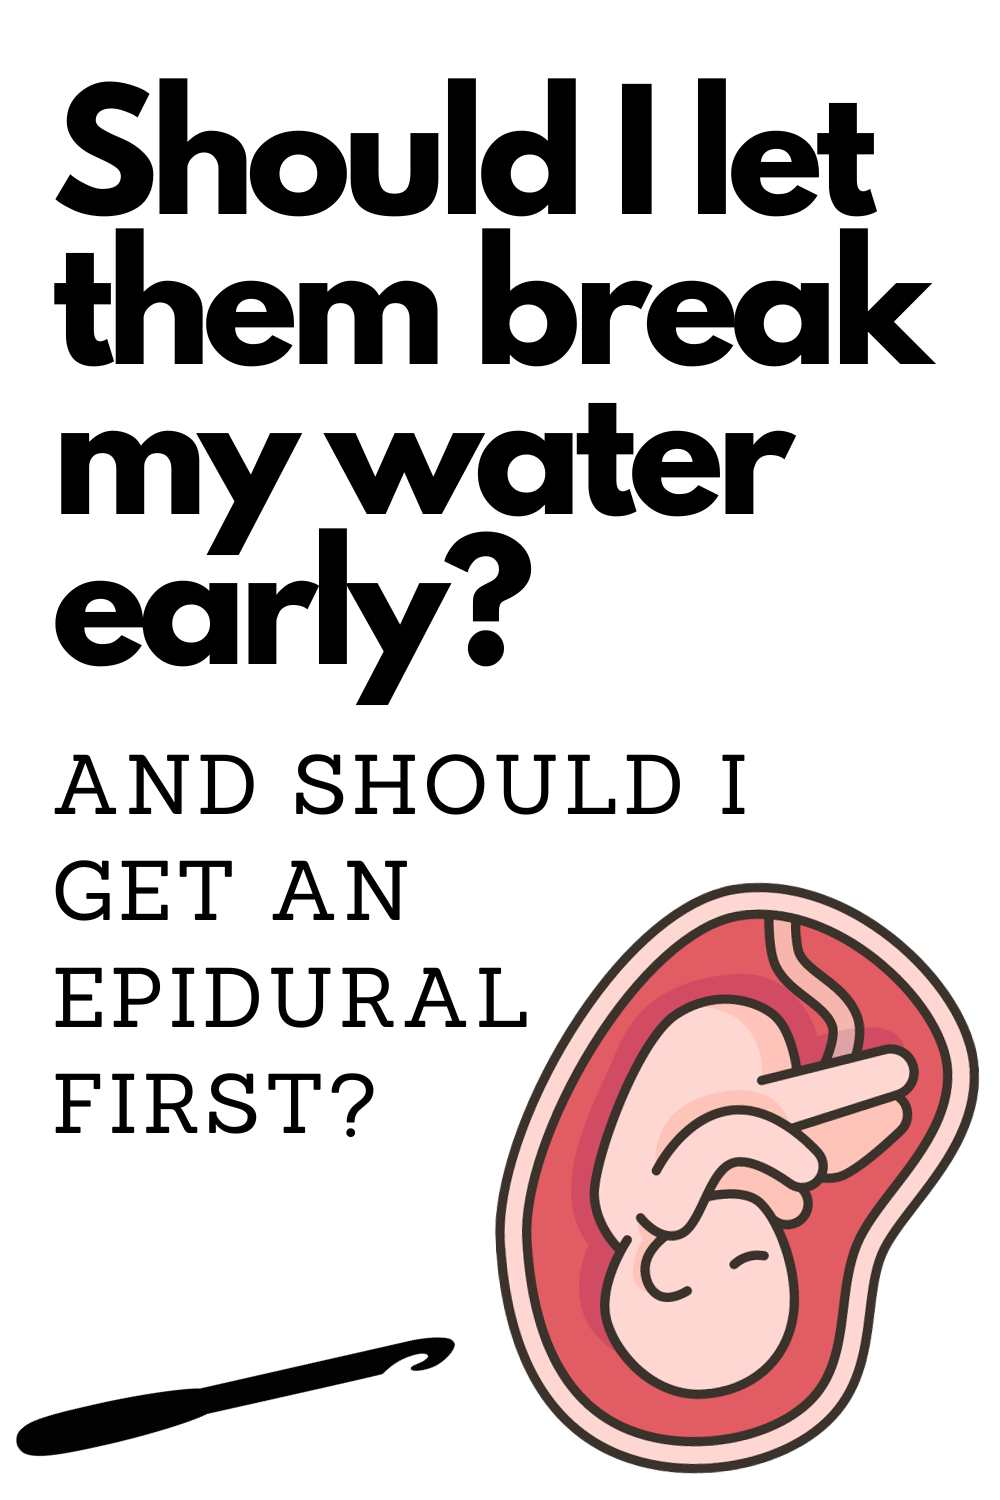 Overwhelmed by the complexities of labor choices? Let's demystify one of the most common questions - should you get a labor epidural before they break your water? Join the discussion and arm yourself with knowledge for your next prenatal checkup.